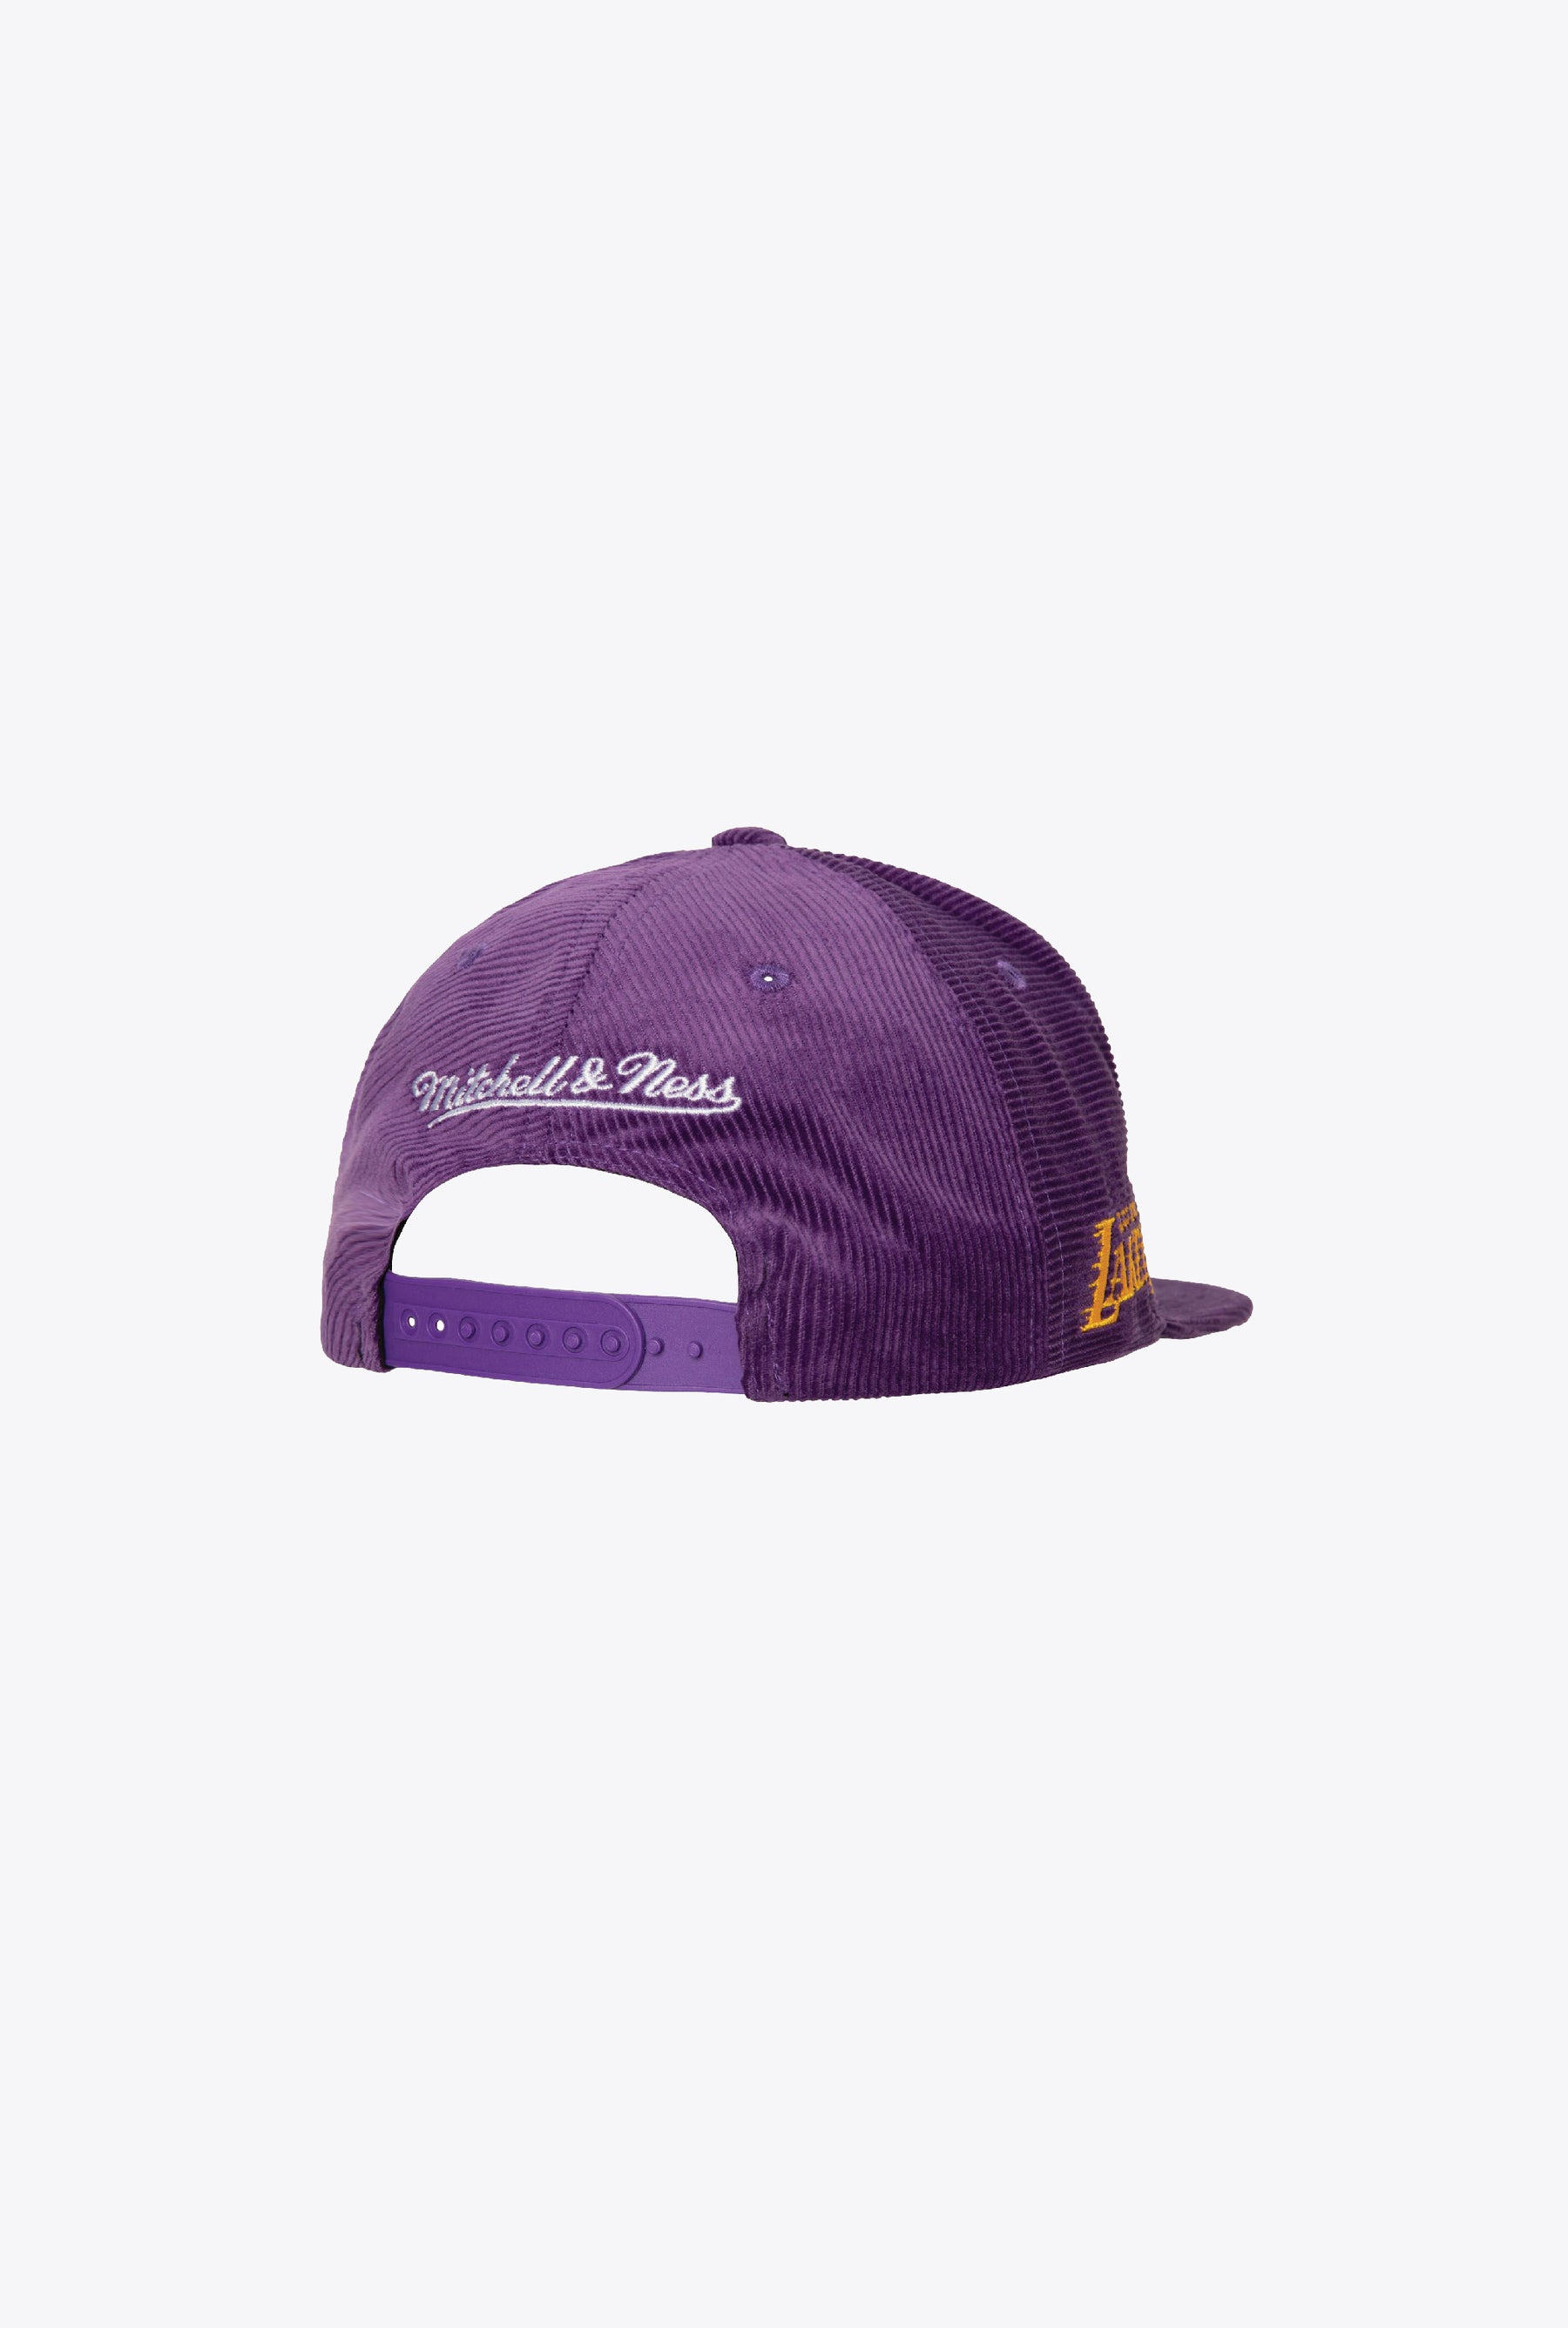 Los Angeles Lakers All Directions Snapback